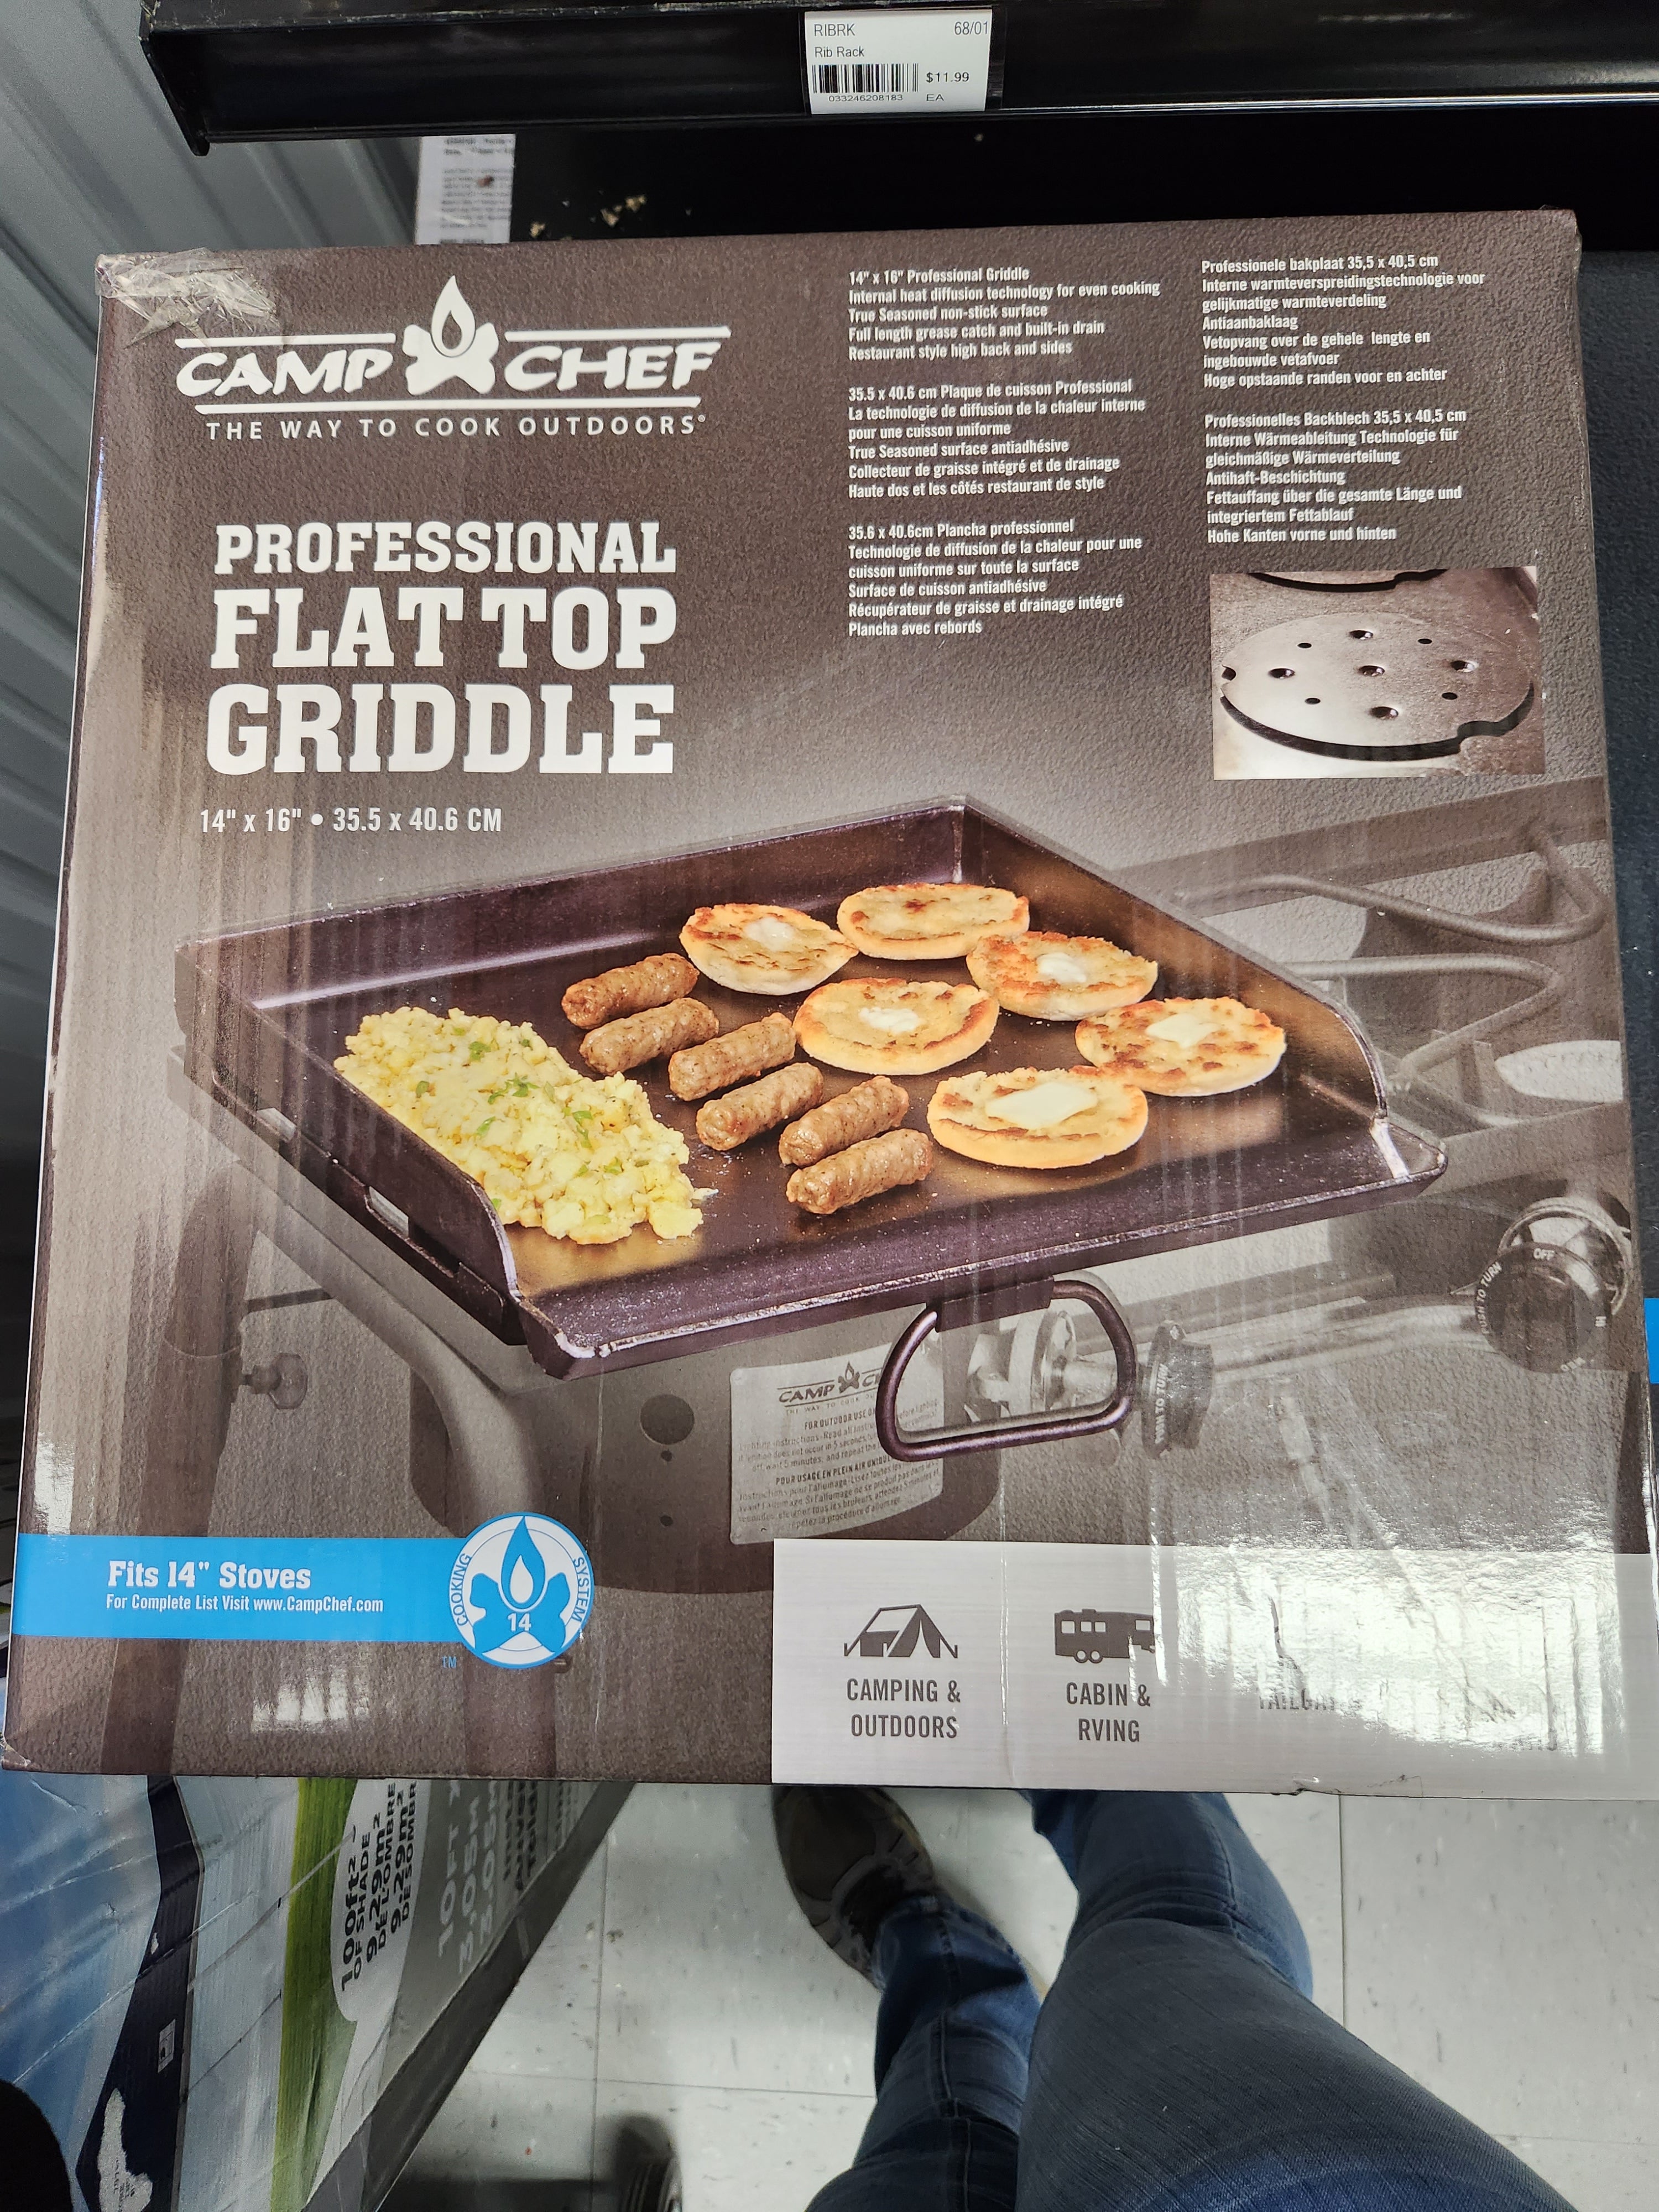 Camp Chef Professional Flat Top Griddle 14" x 16"